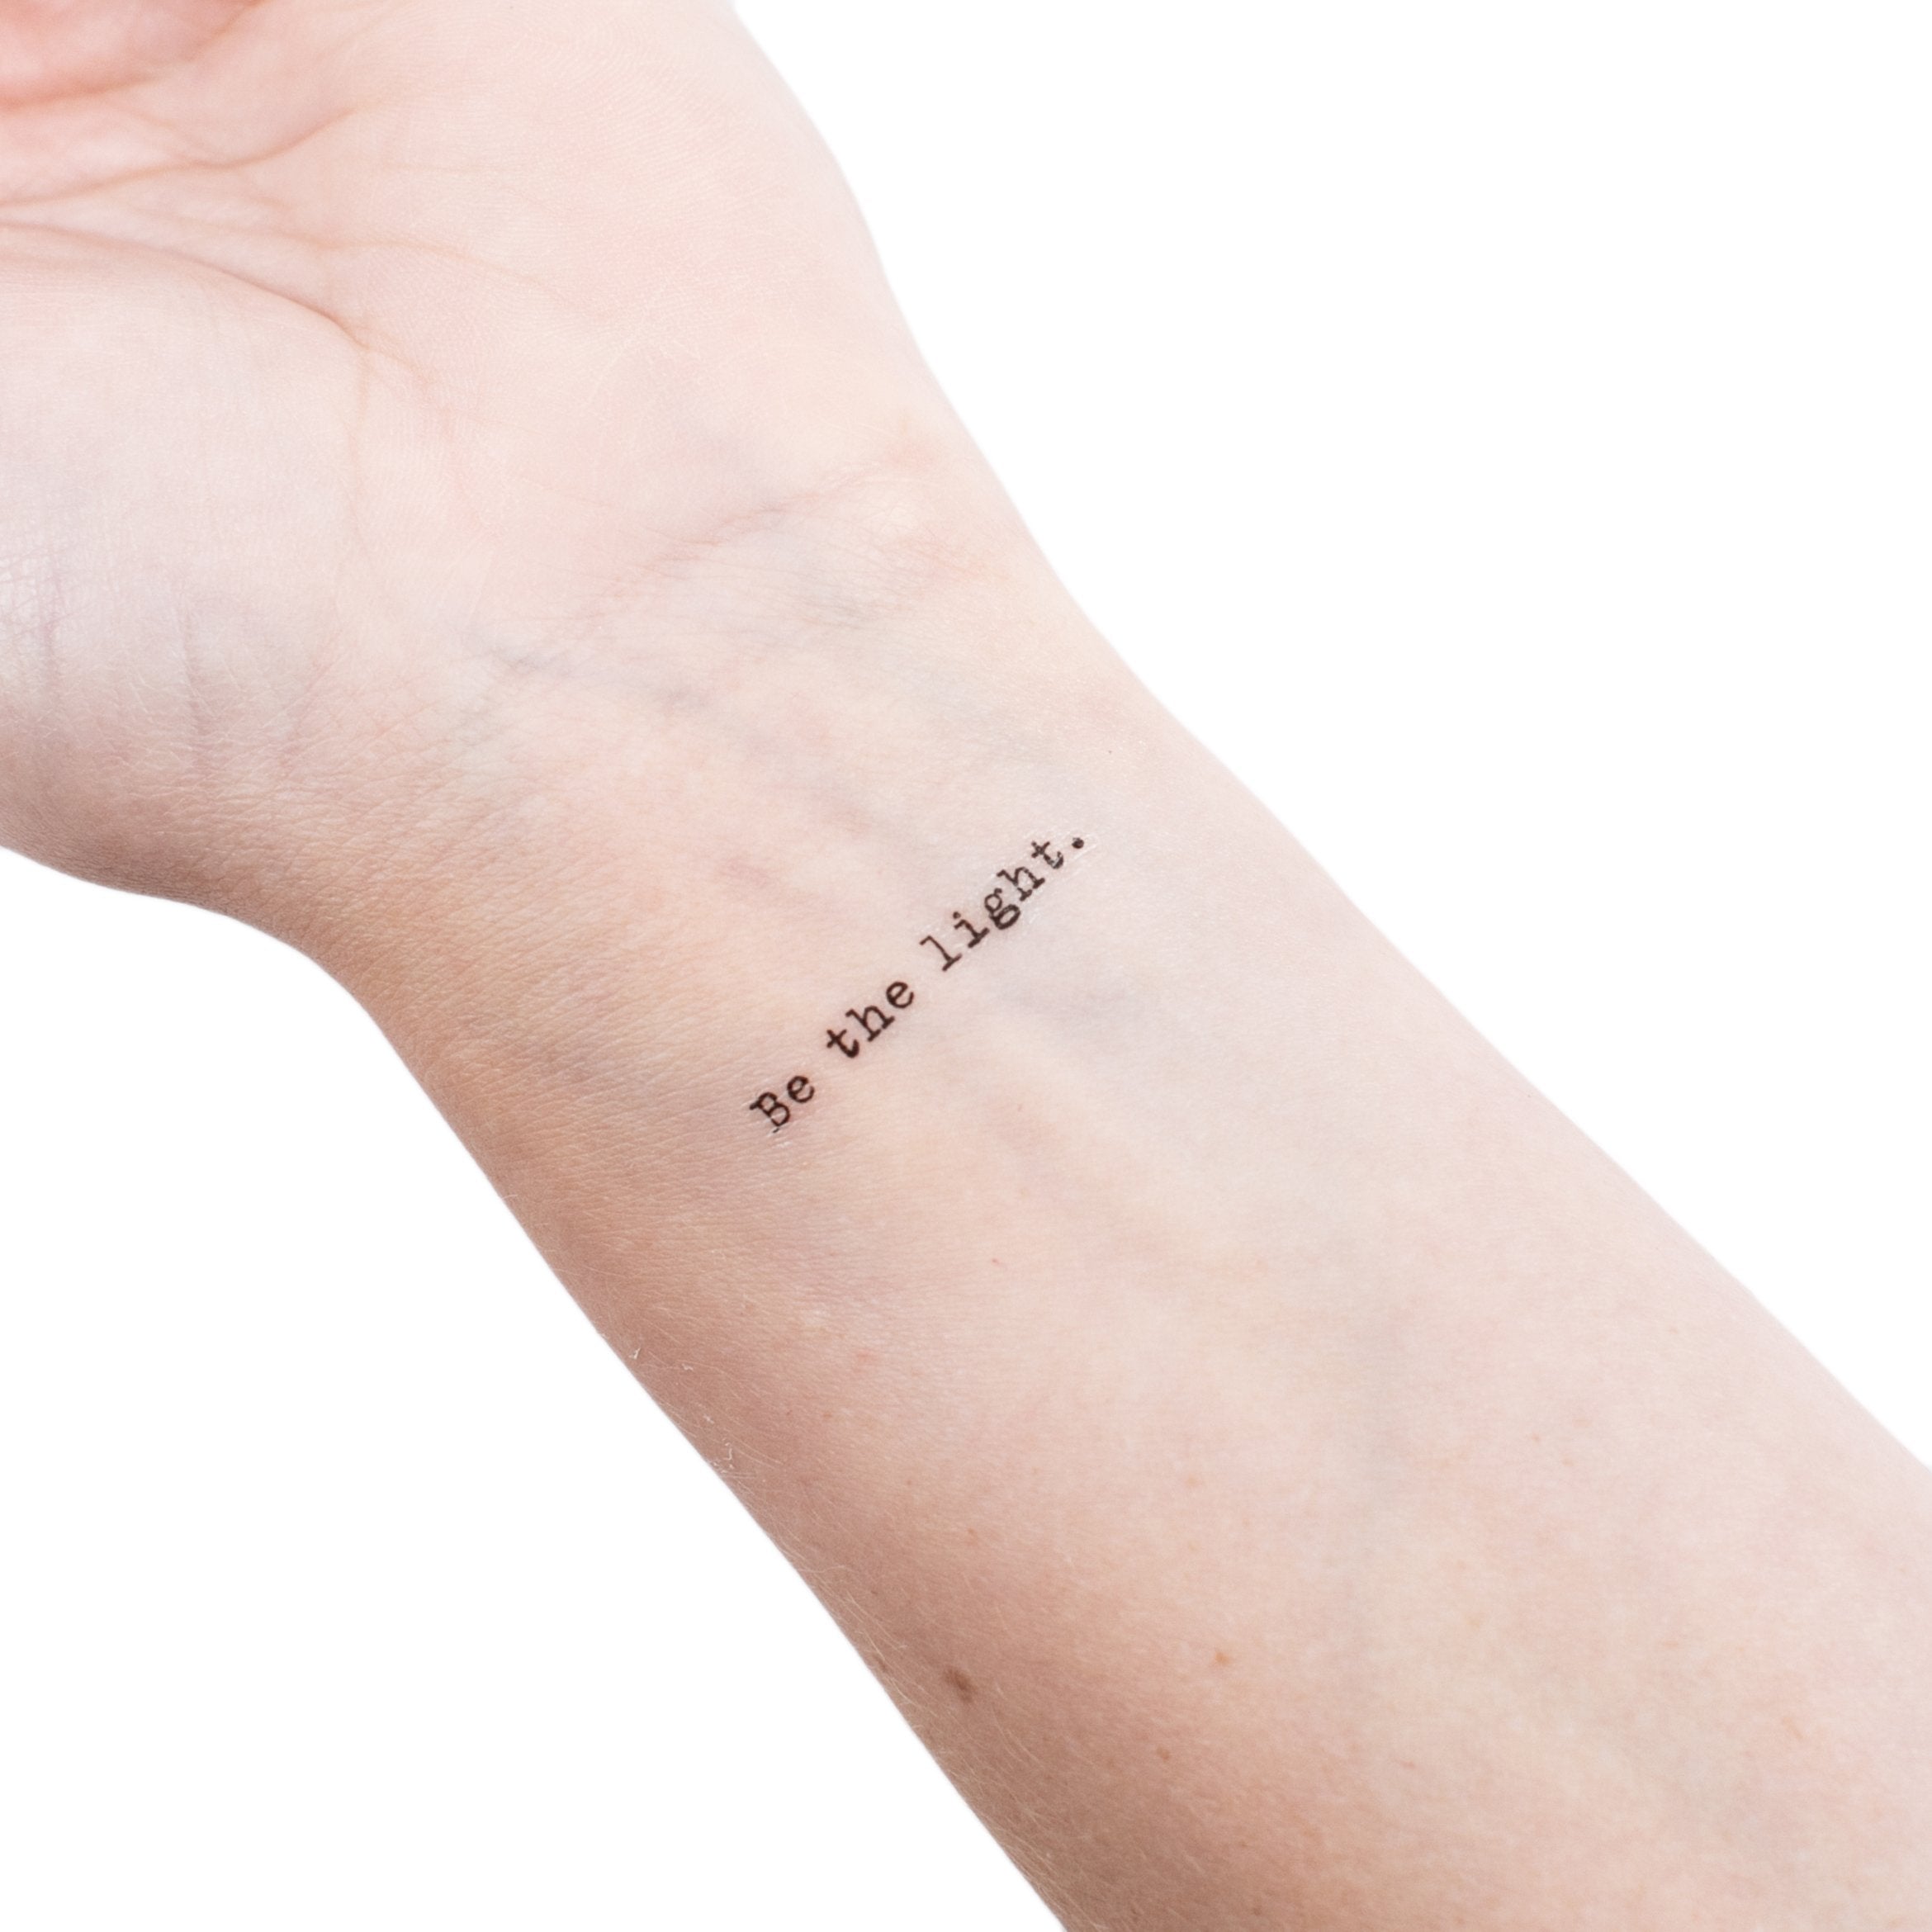 Rage Against The Dying Of The Light Temporary Tattoo Sticker - OhMyTat